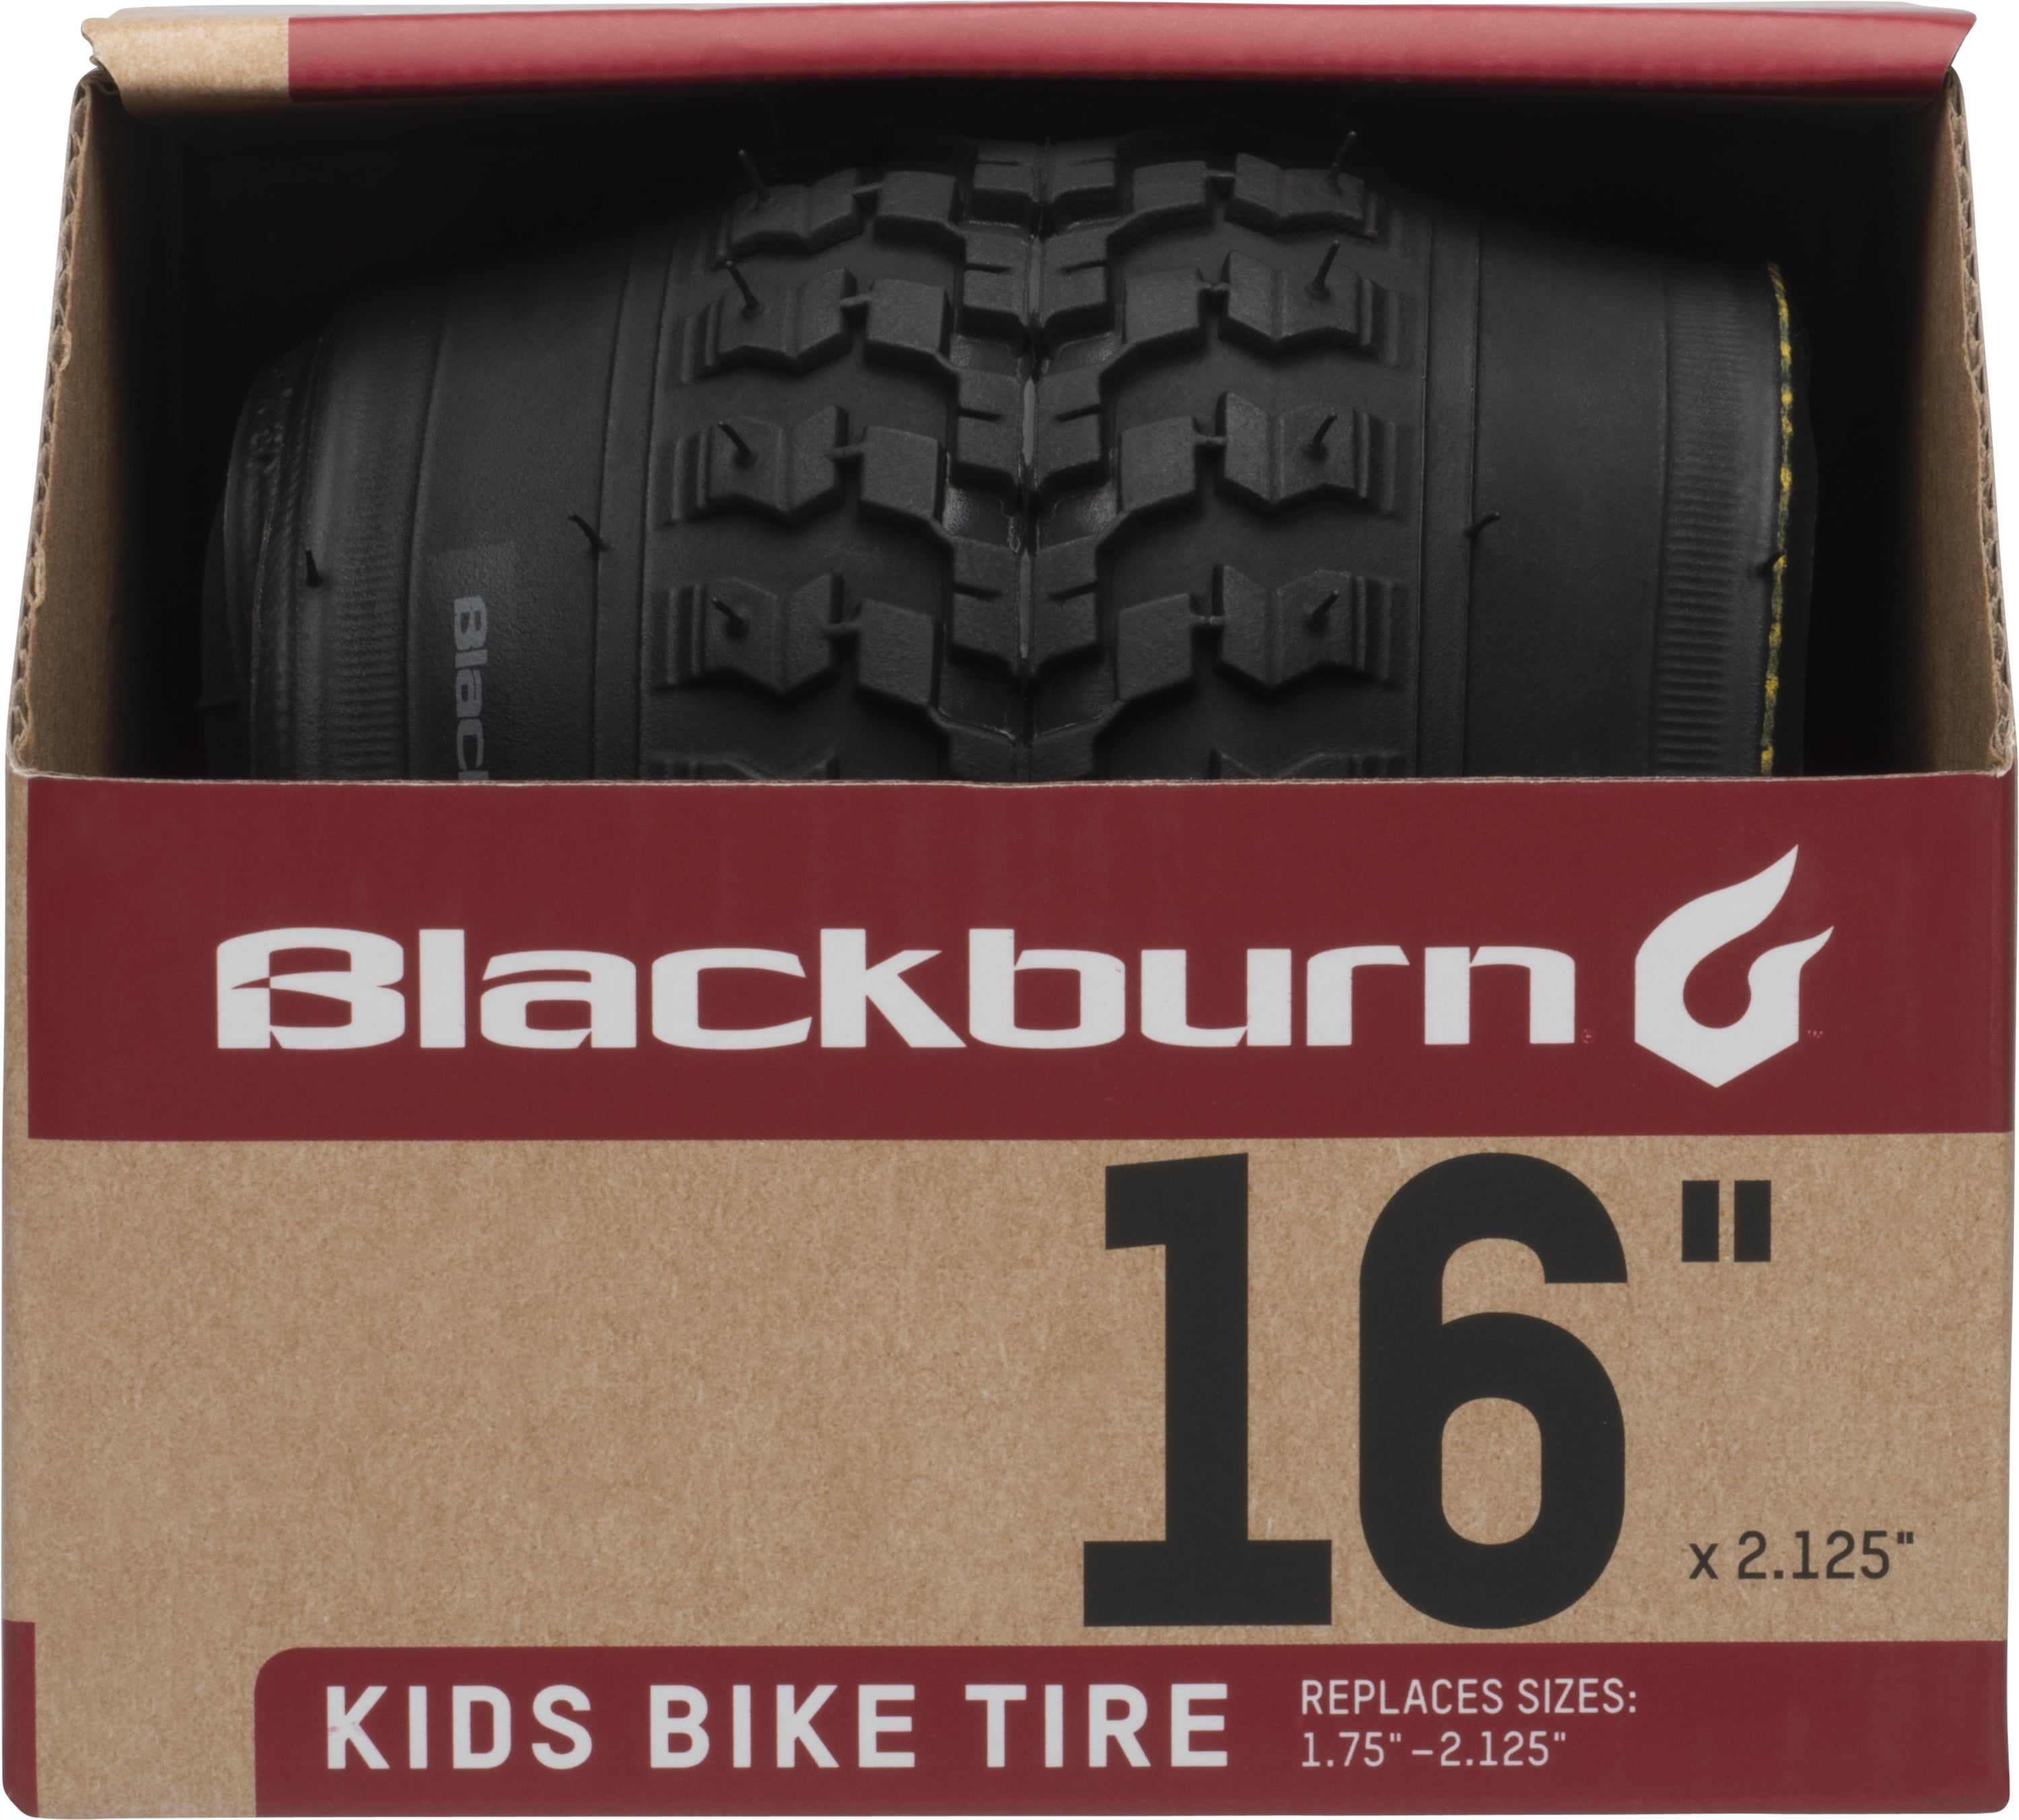 BICYCLE TIRE TUBES 16 X 2.125 FIT MANY 16" TIRES 